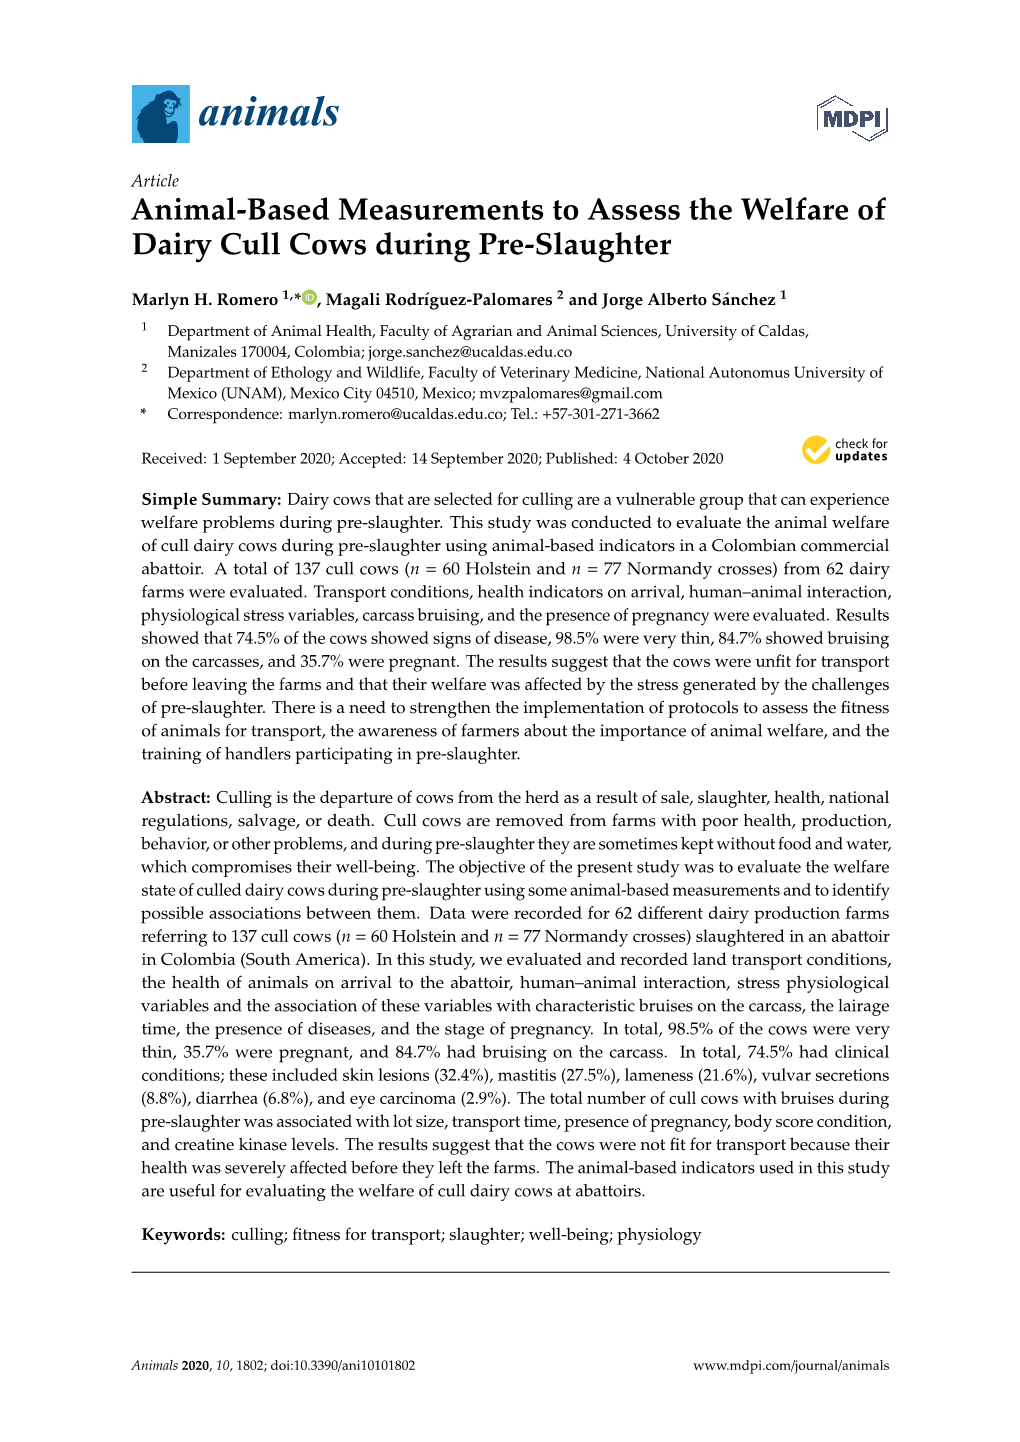 Animal-Based Measurements to Assess the Welfare of Dairy Cull Cows During Pre-Slaughter